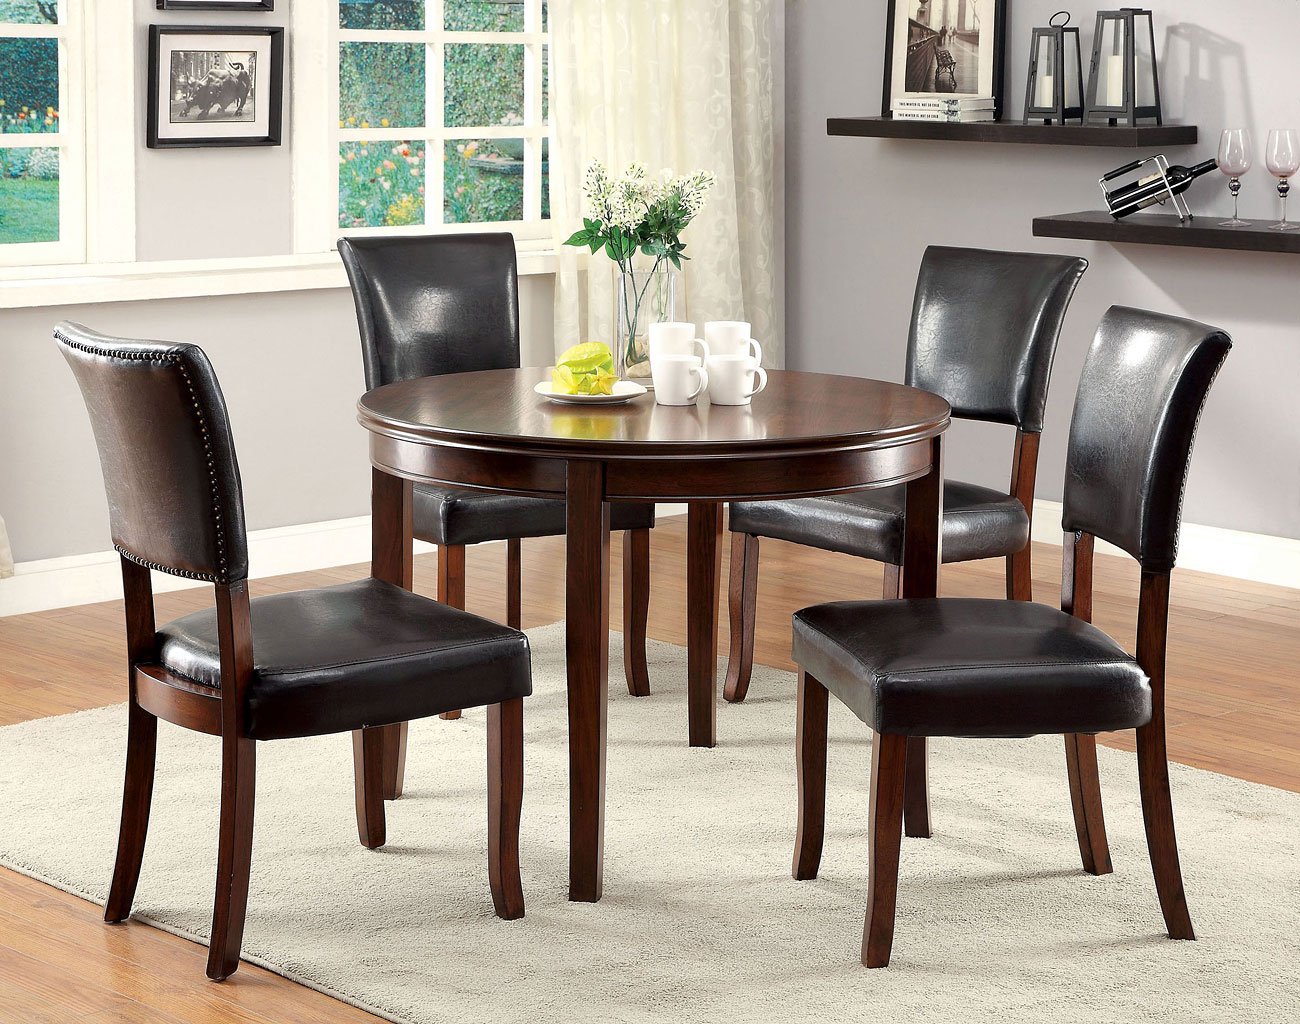 dwight ll dining room table